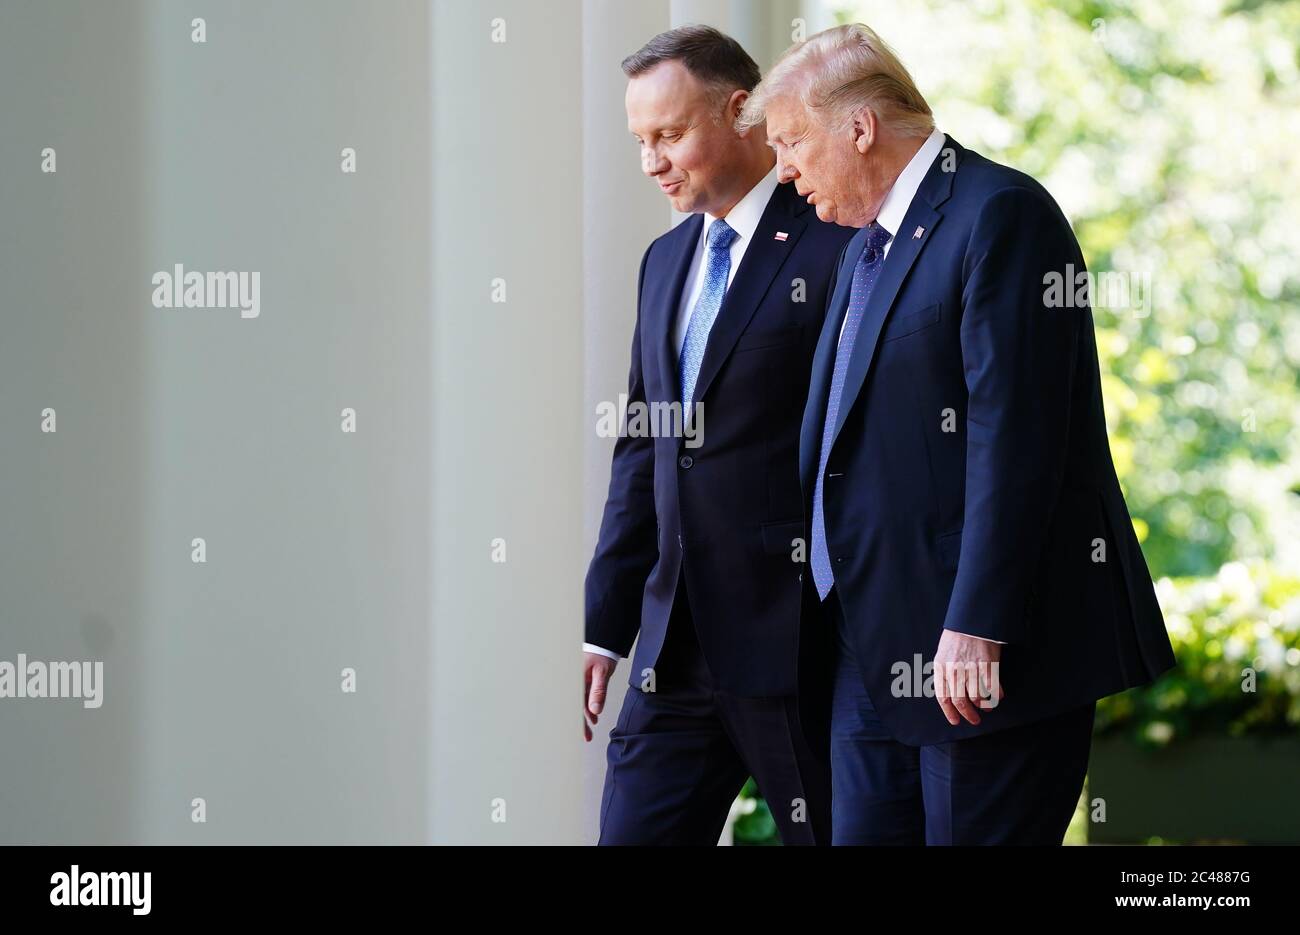 US President Donald J. Trump (R) and Polish President Andrzej Duda arrive to hold a joint press conference in the Rose Garden of the White House in Washington, DC, USA, 24 June 2020. Duda, a conservative nationalist facing a tight re-election race back home, is the first foreign leader to visit the White House in more than three months.Credit: Jim LoScalzo/Pool via CNP /MediaPunch Stock Photo